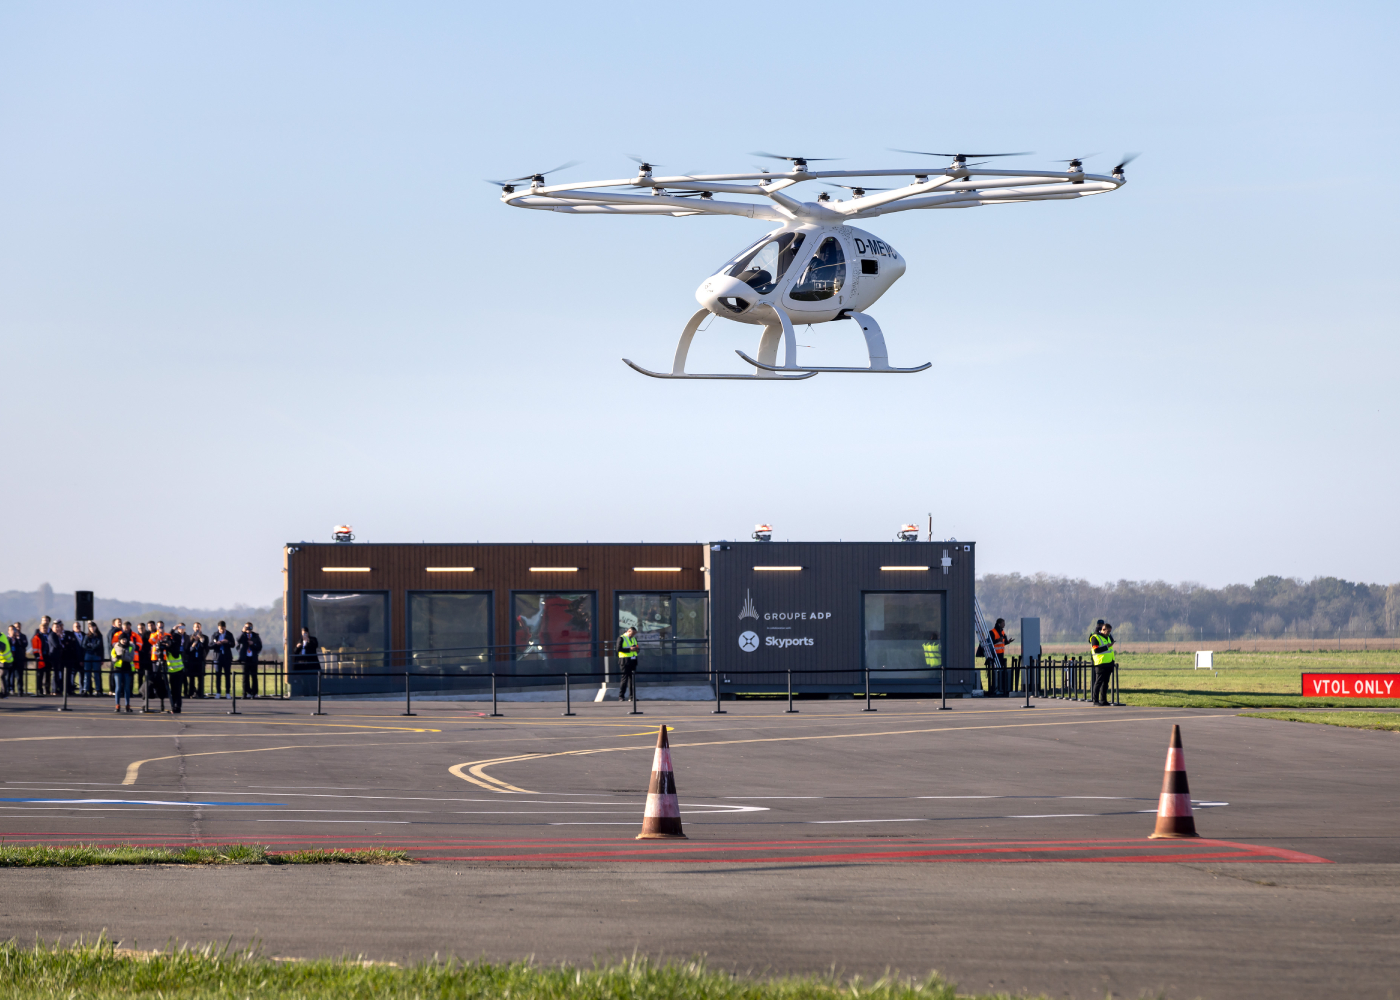 Volocopter Skyports